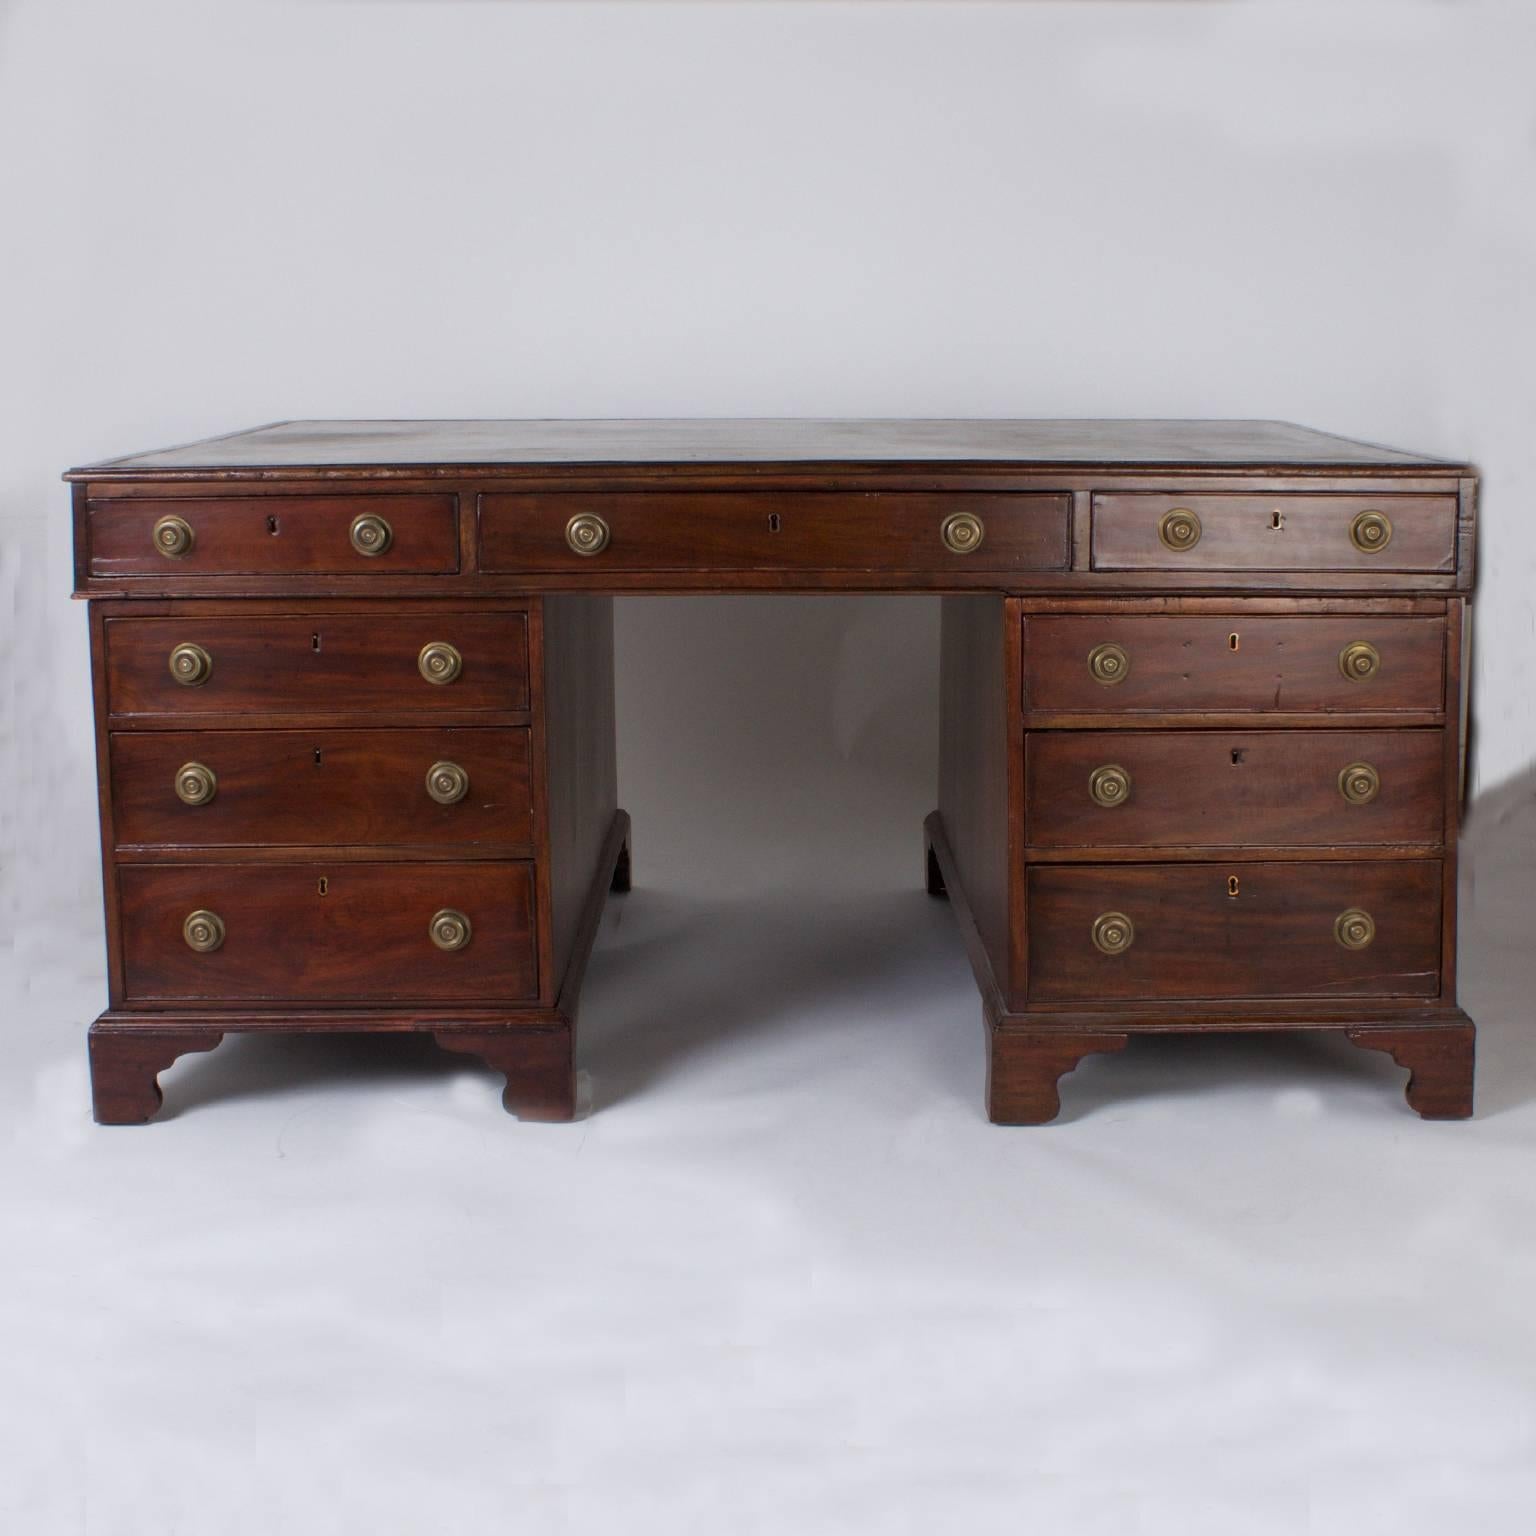 Large-scale, 19th century three part English mahogany partners desk, executed in a Georgian style and featuring a mossy green, tooled leather top with warm, aged patina. Nine drawers on each side, brass hardware and all settled on an outside bracket